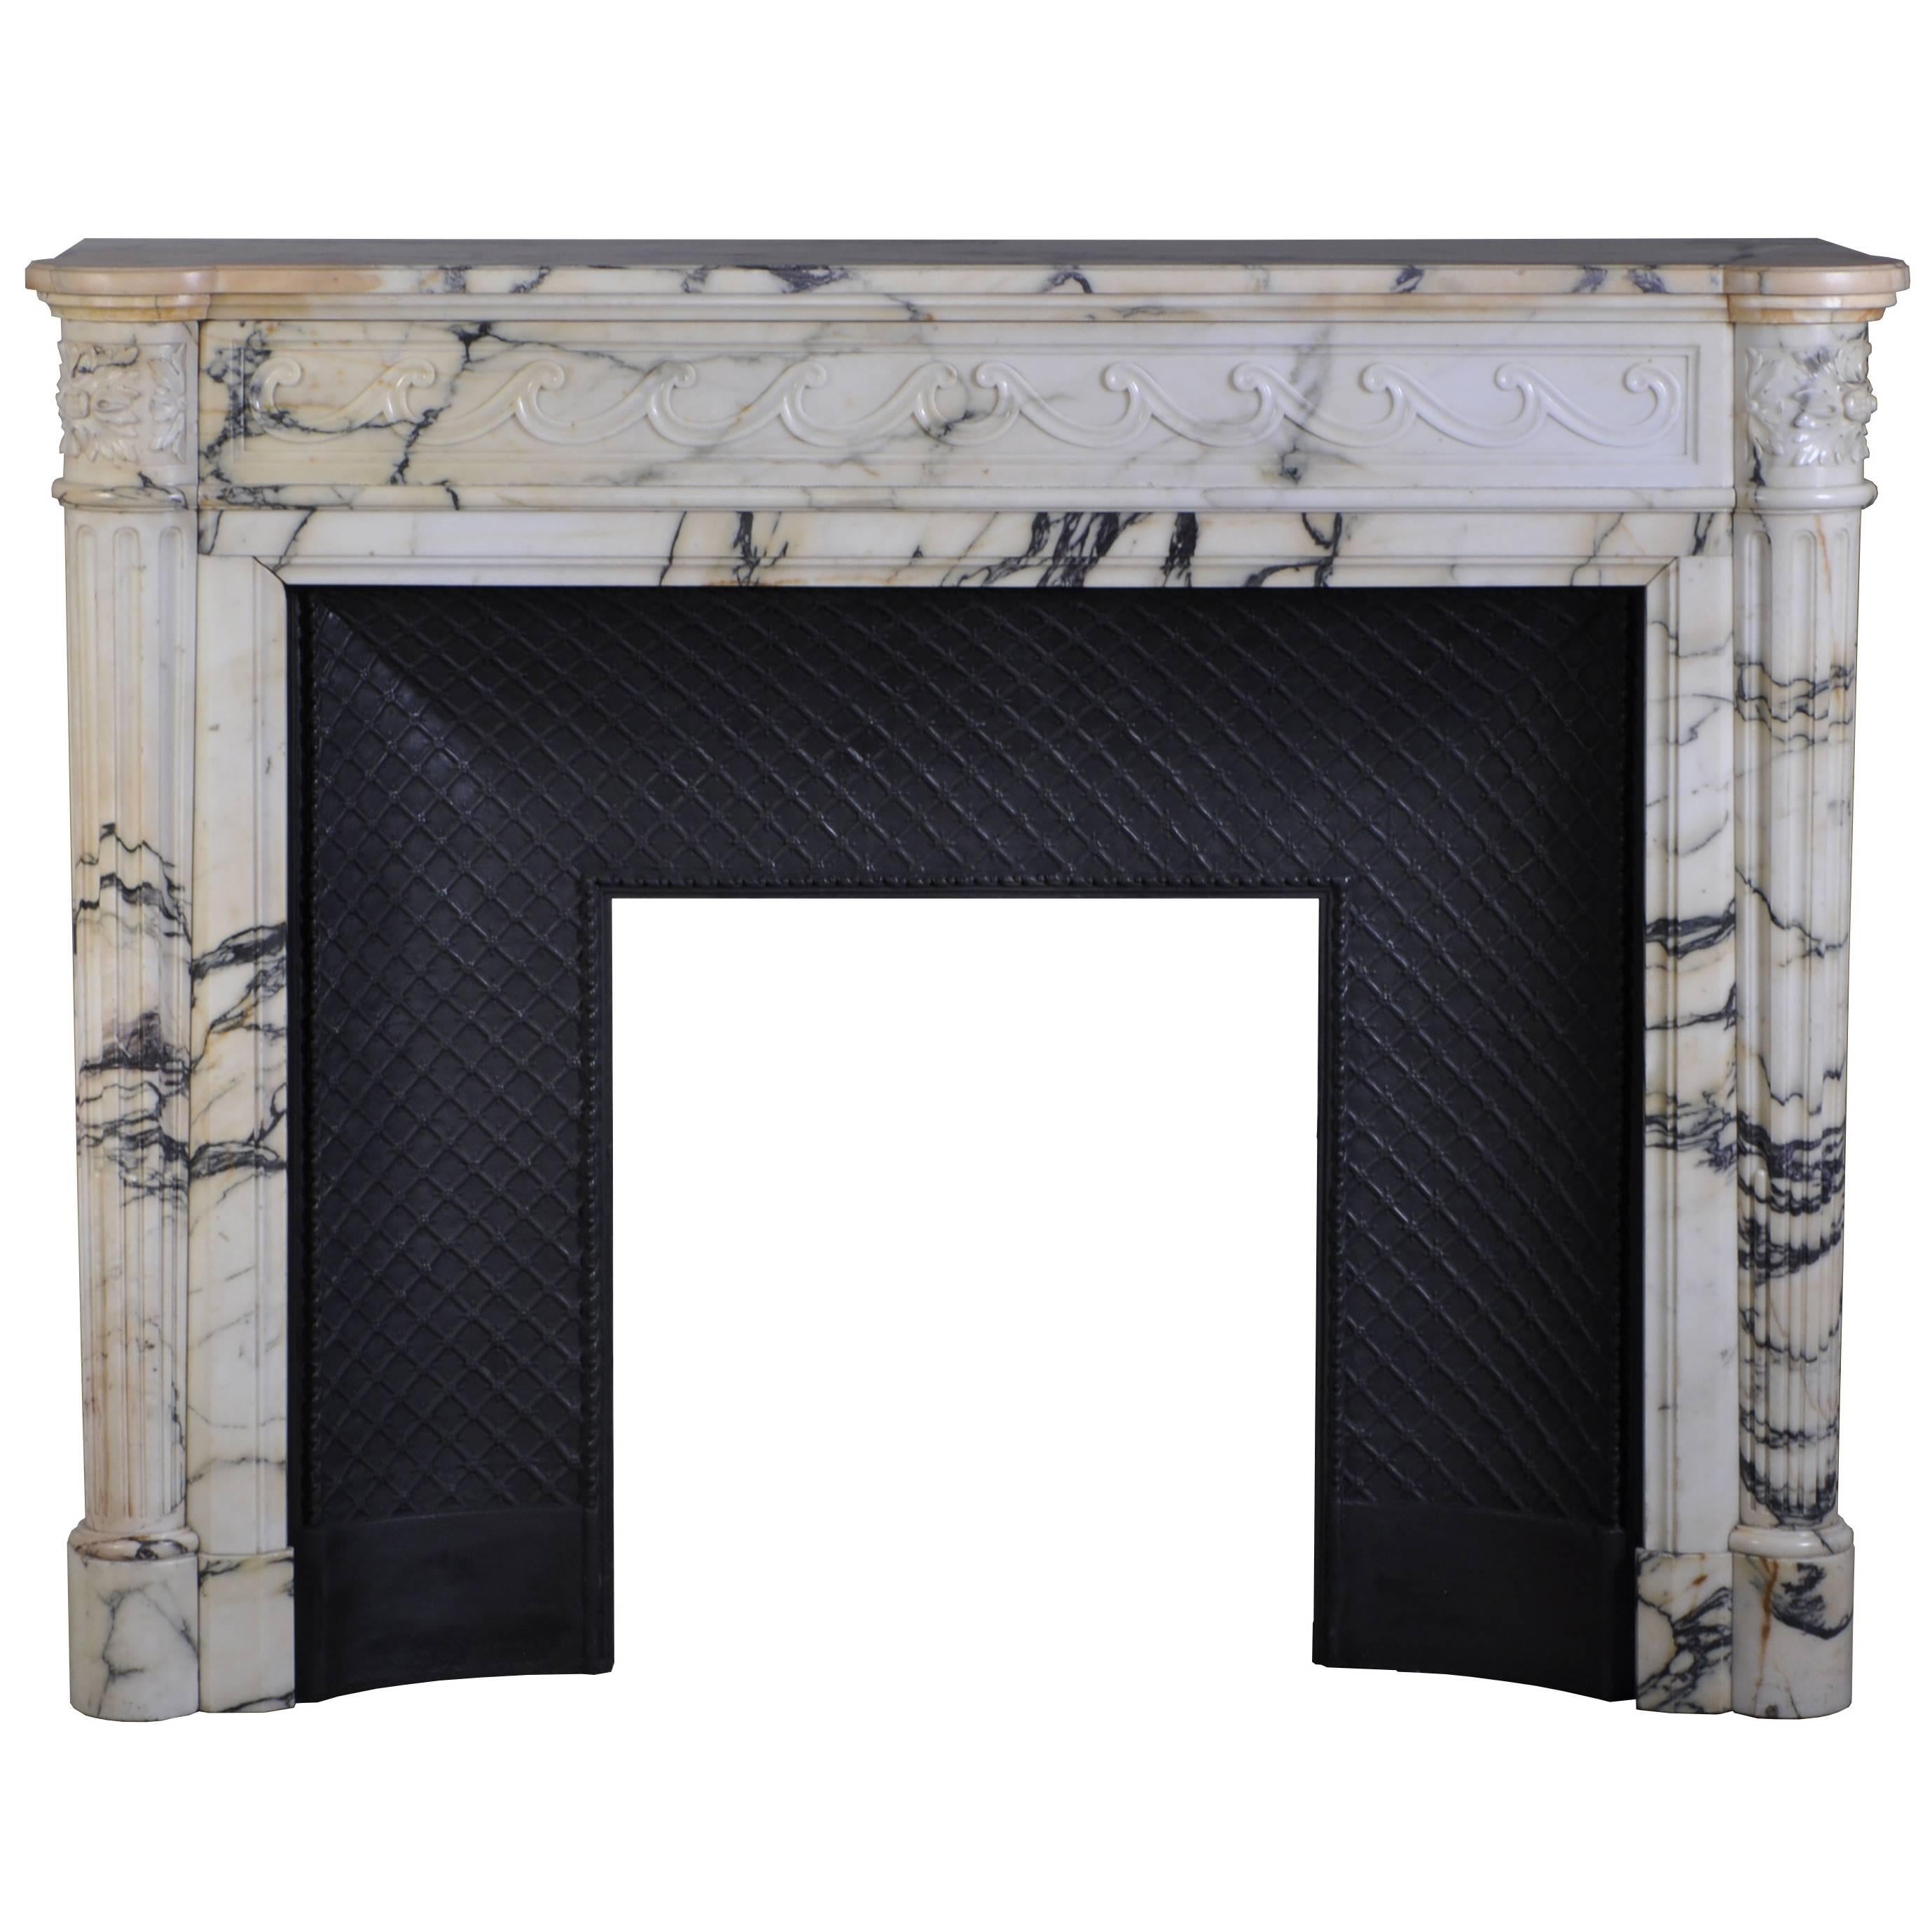 Louis XVI Style Fireplace with Half Columns, 19th Century For Sale